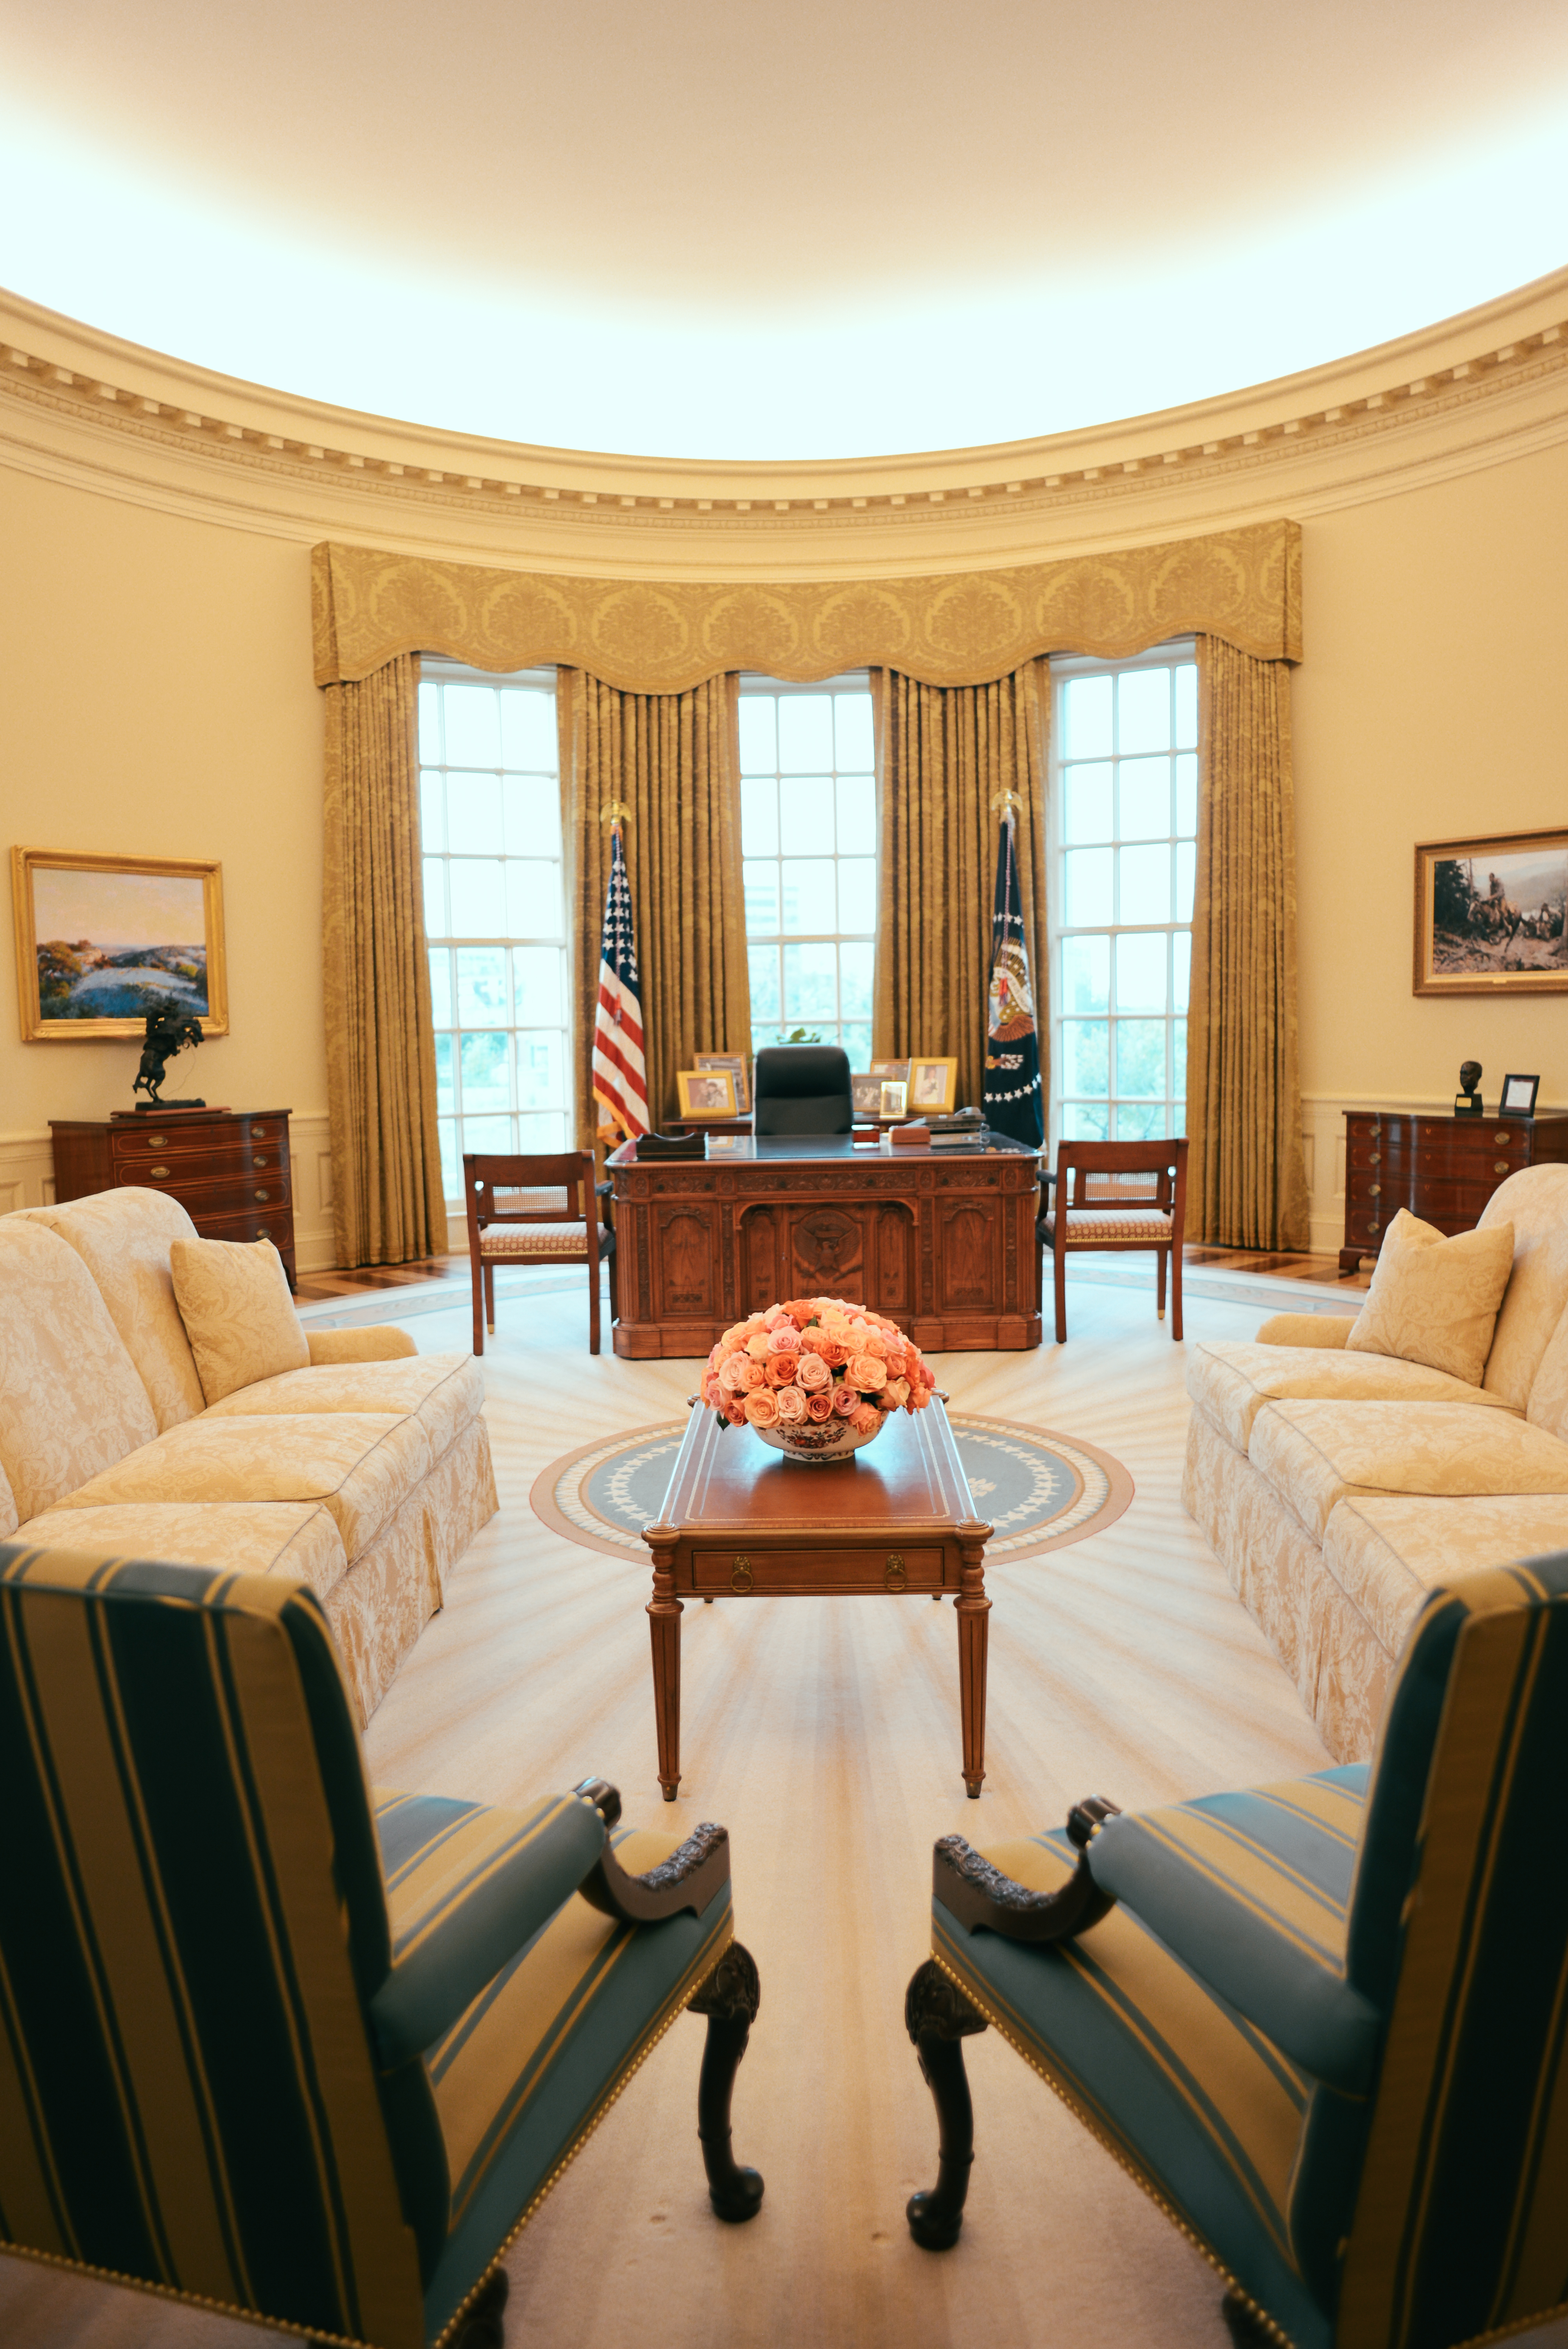 A full-size replica of the President's Oval Office, vertical (portrait) view